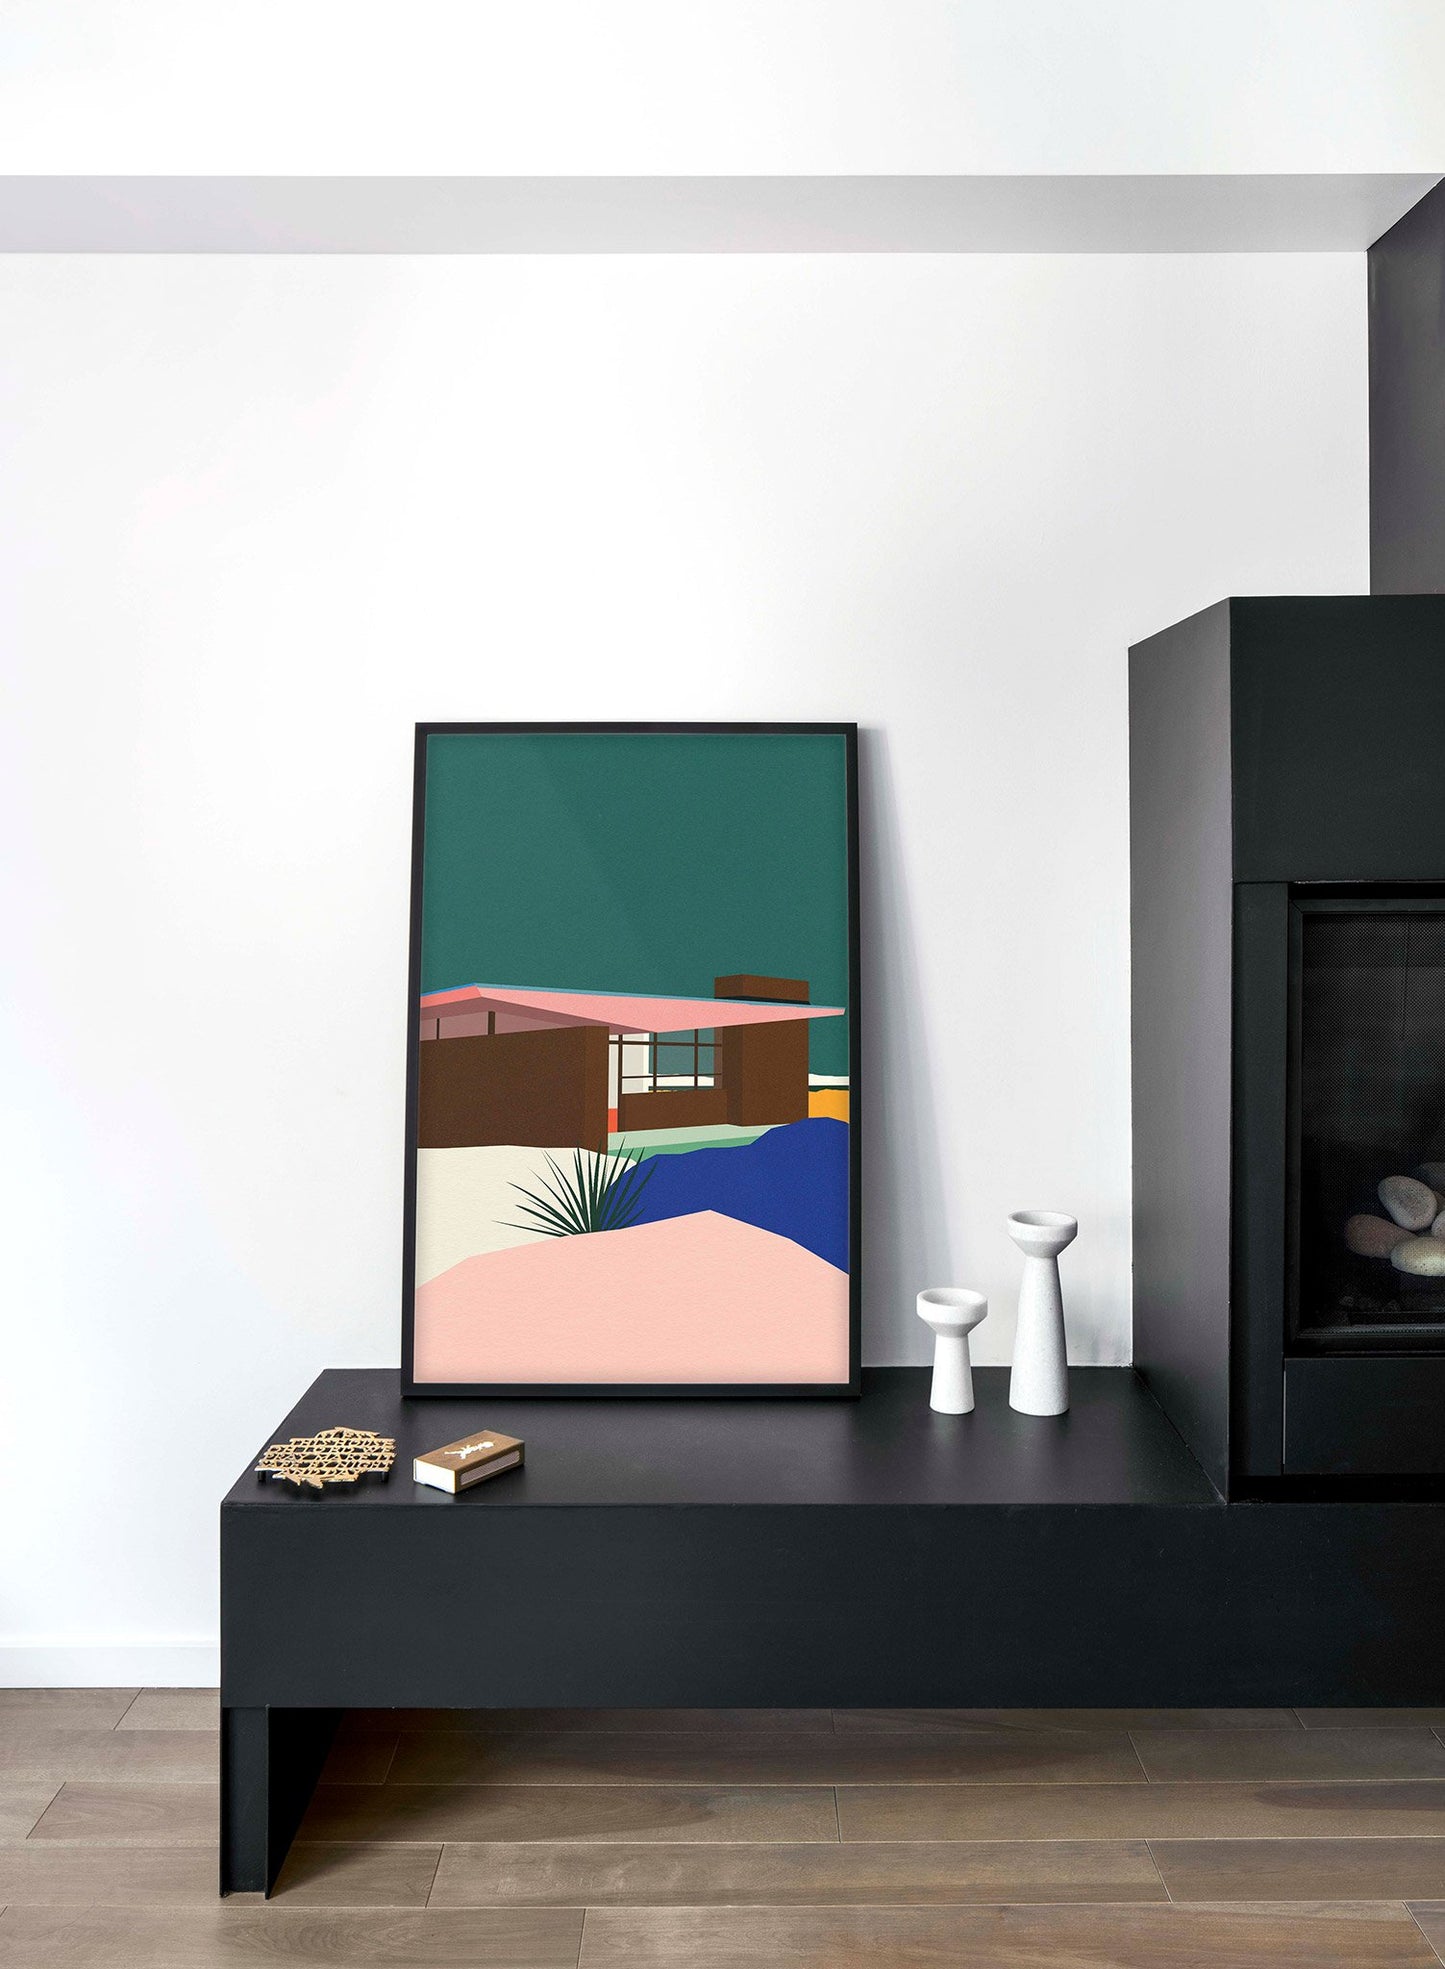 Minimalist pop art paper illustration by German artist Rosi Feist with Edris House in Palm Springs - Lifestyle - Living Room